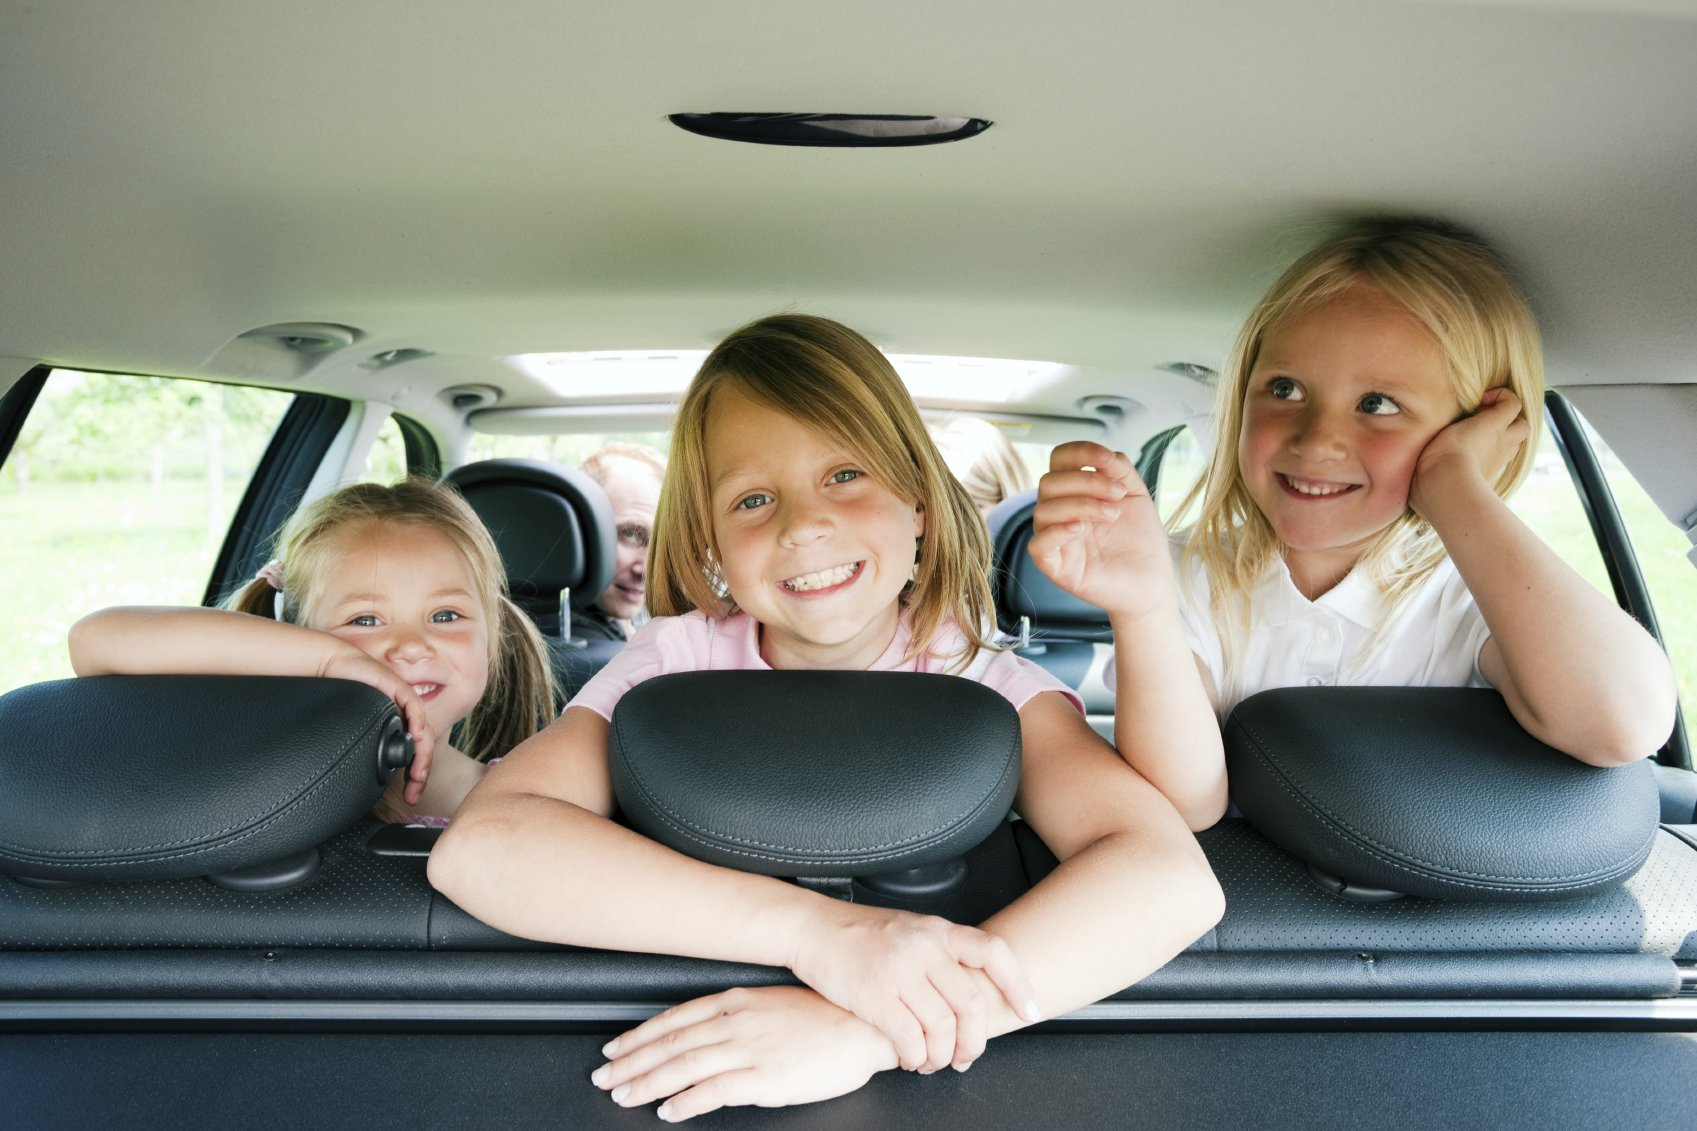 Transfers to Marins Playa hotel with car baby seats